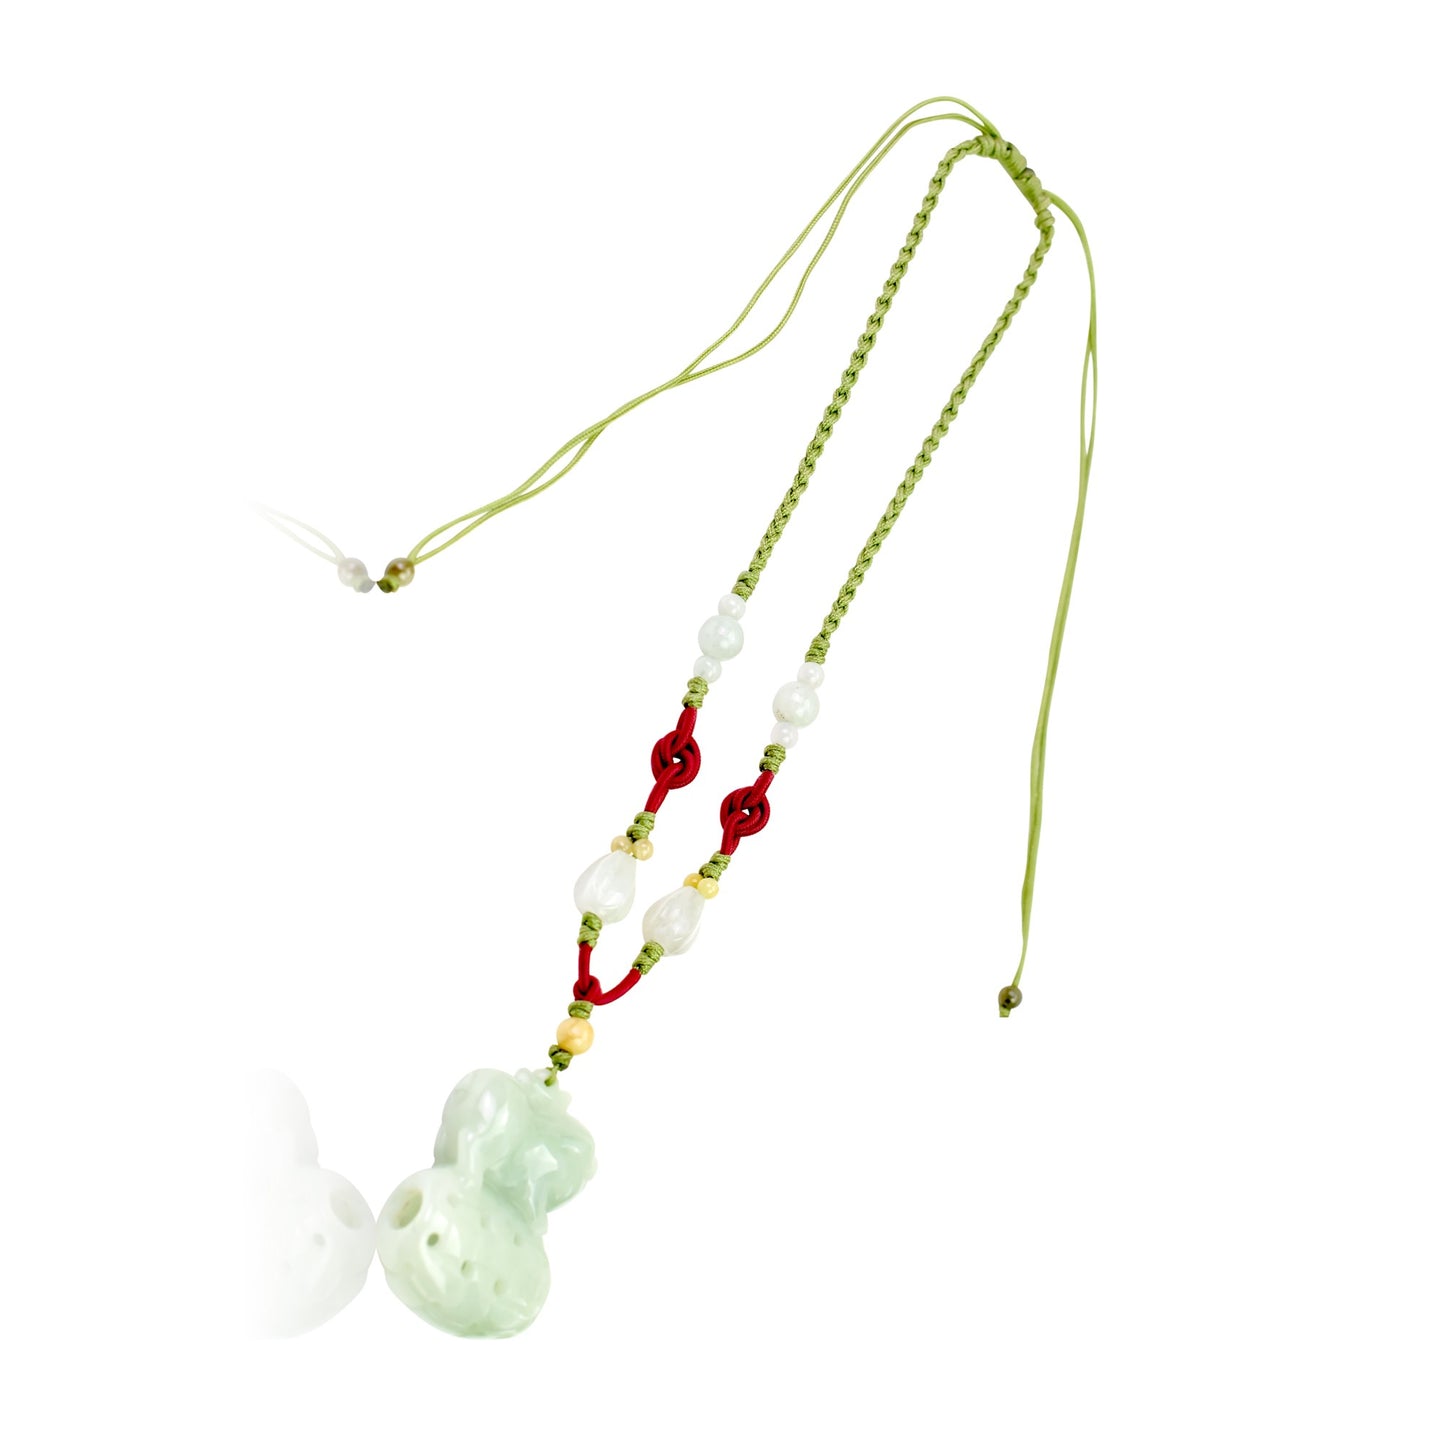 Attract Luck and Wealth with the Boar Chinese Zodiac Handmade Jade Necklace made with Sea Green Cord